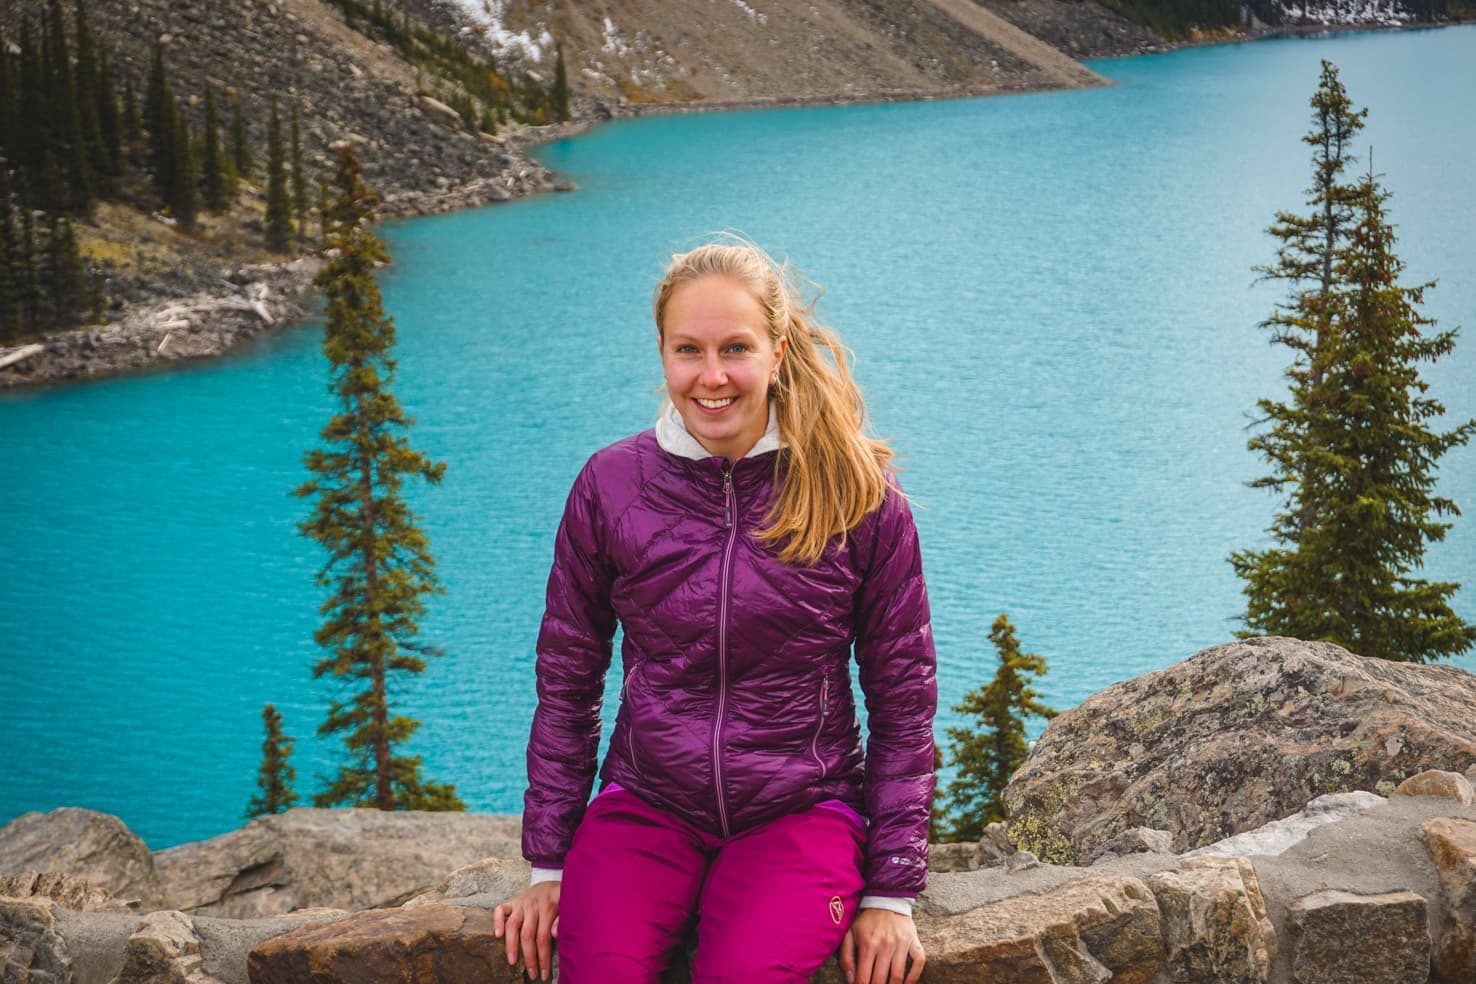 Hiking packing list for summer in the mountains - Moraine Lake, Banf National Park, Canada-2